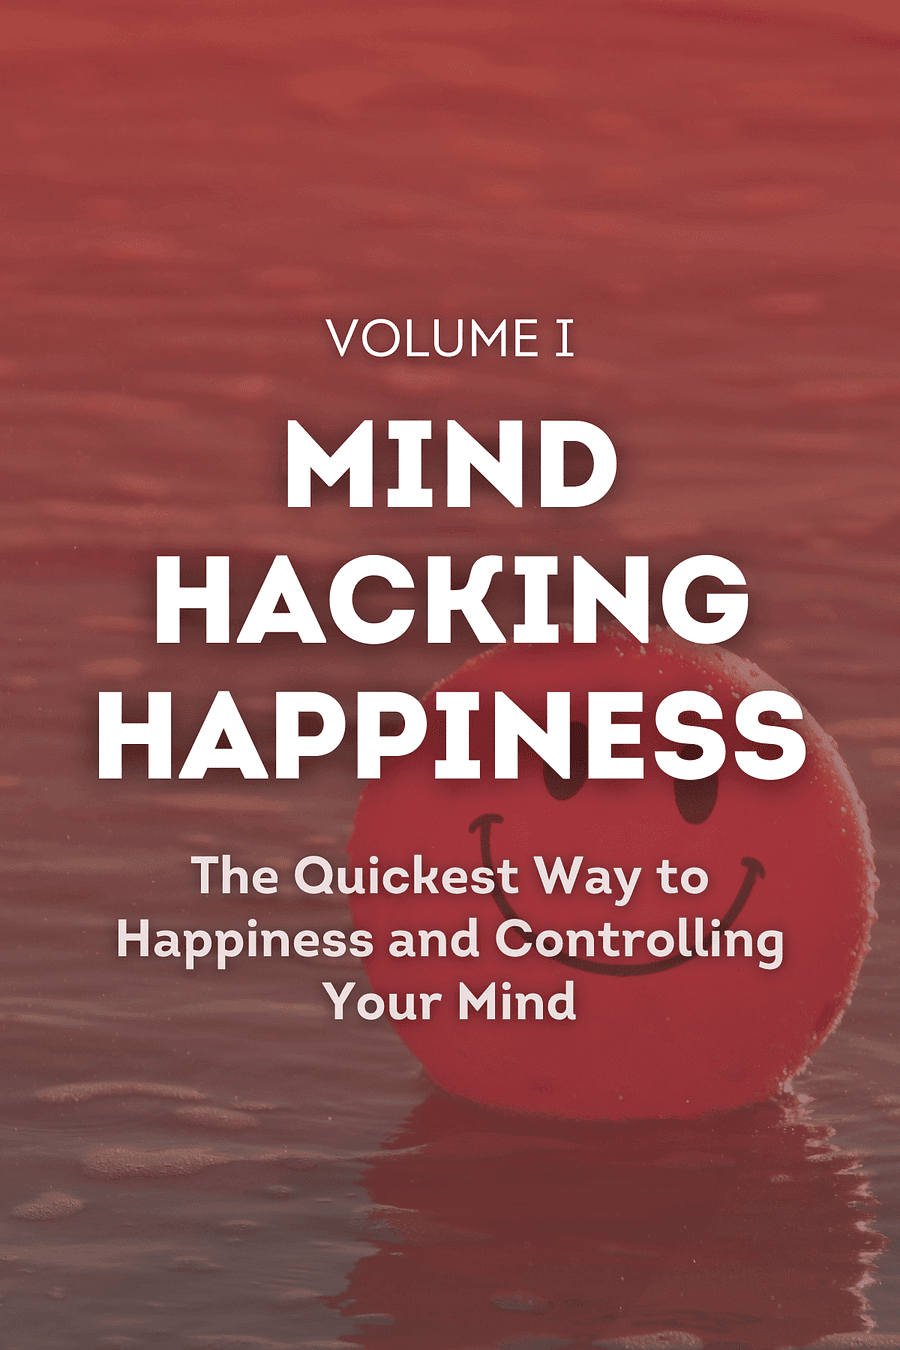 Mind Hacking Happiness Volume I by Sean Webb - Book Summary